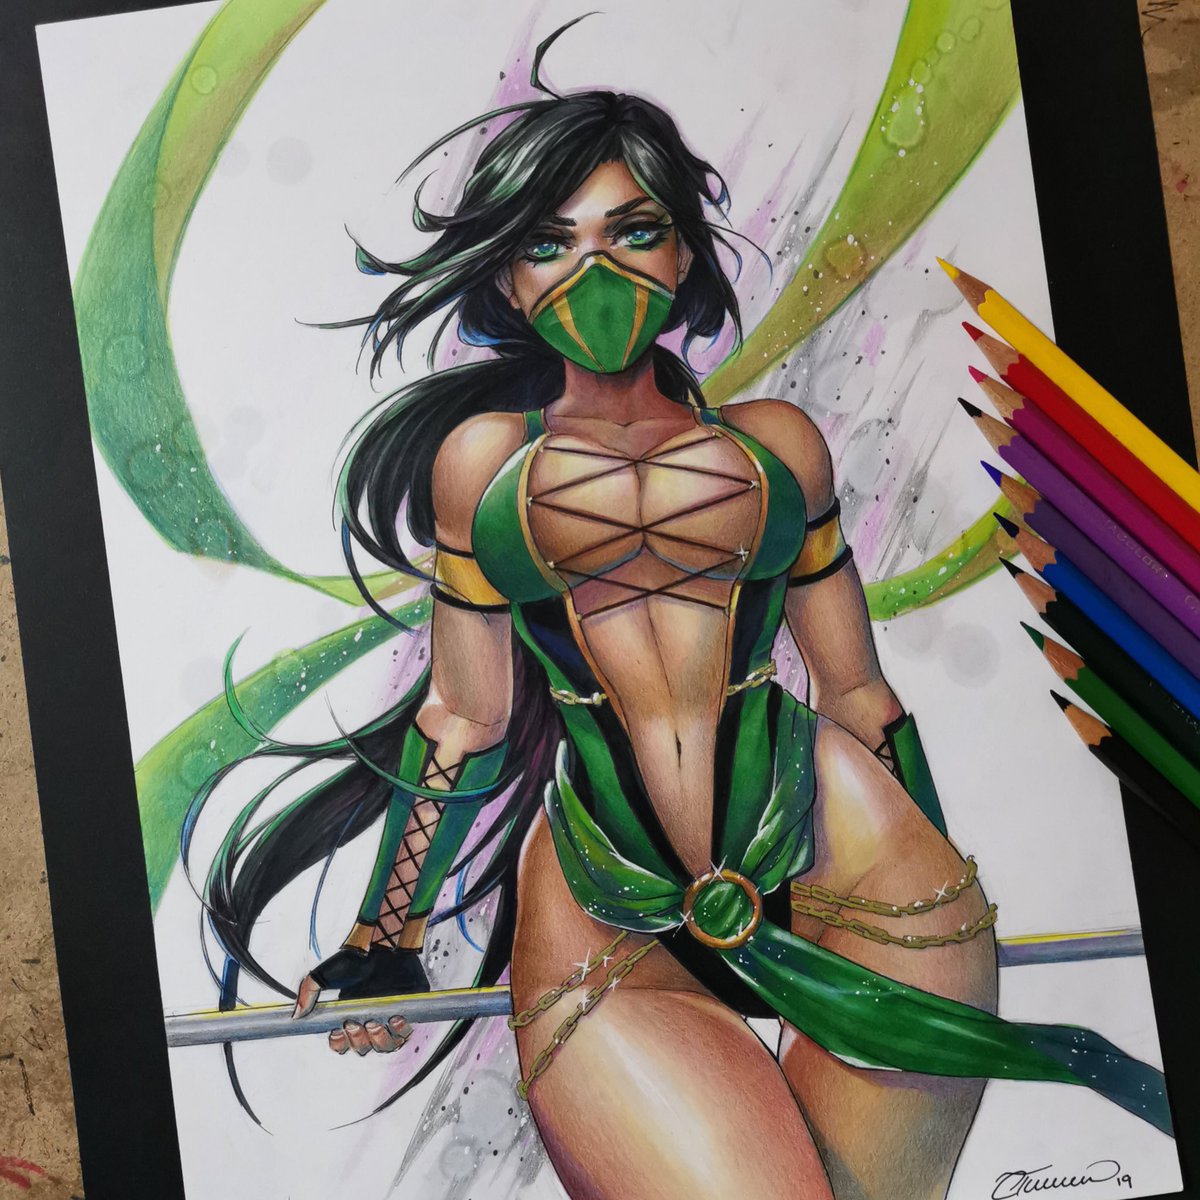 32. SOLD Jade from Mortal Kombat done for fun with copic markers and prisma...